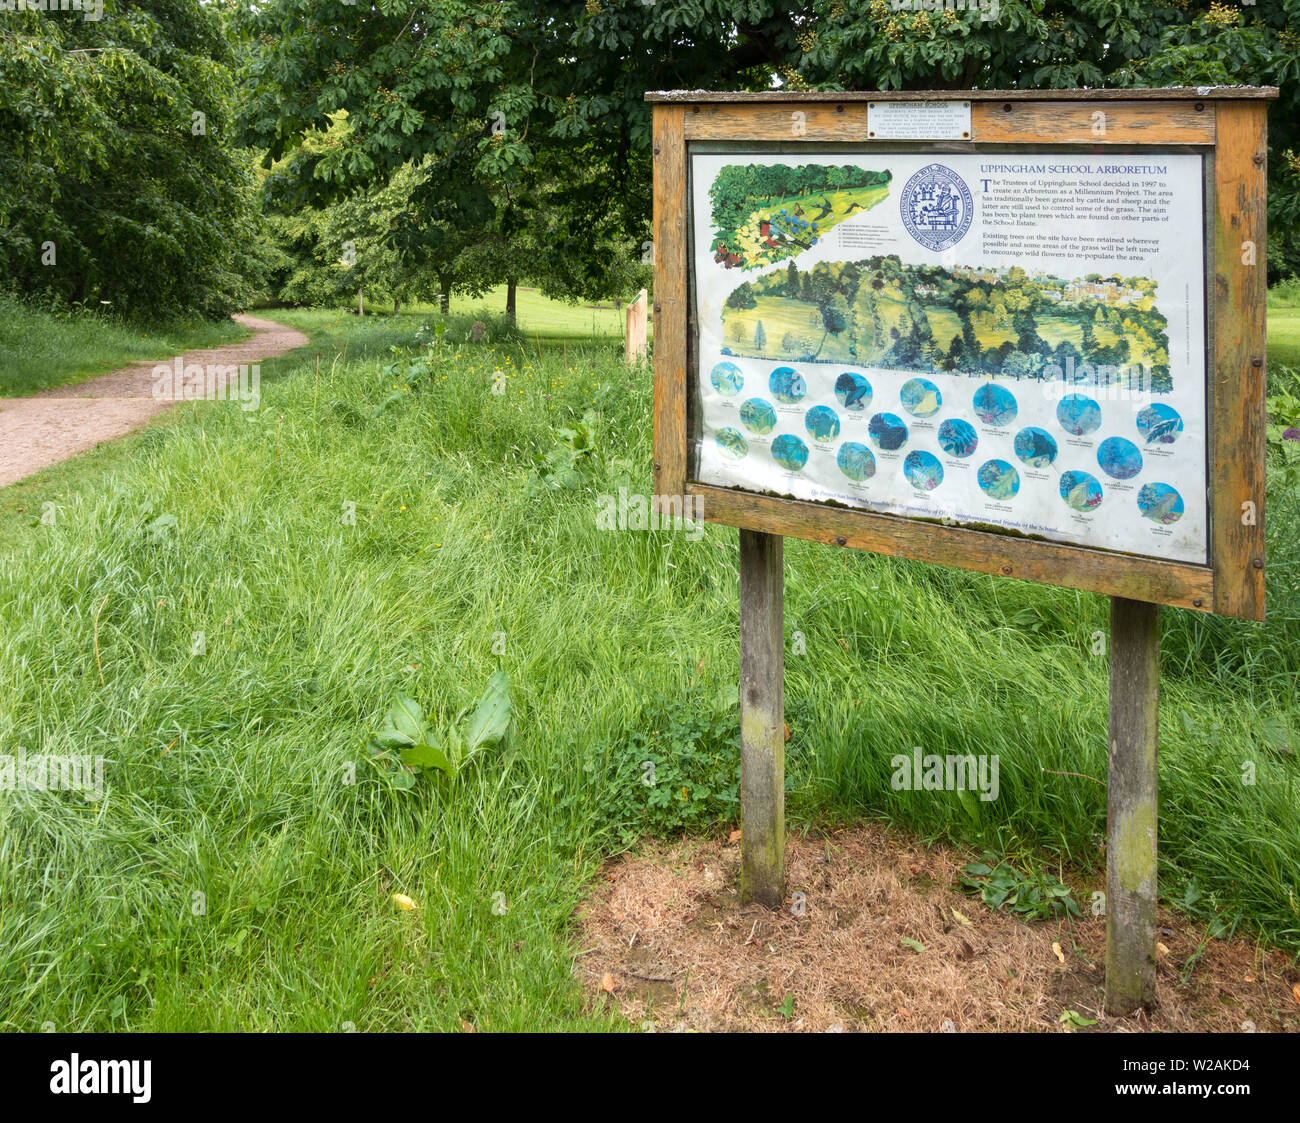 Uppingham School Arboretum with trees, grass and information sign, Rutland, England, UK Stock Photo